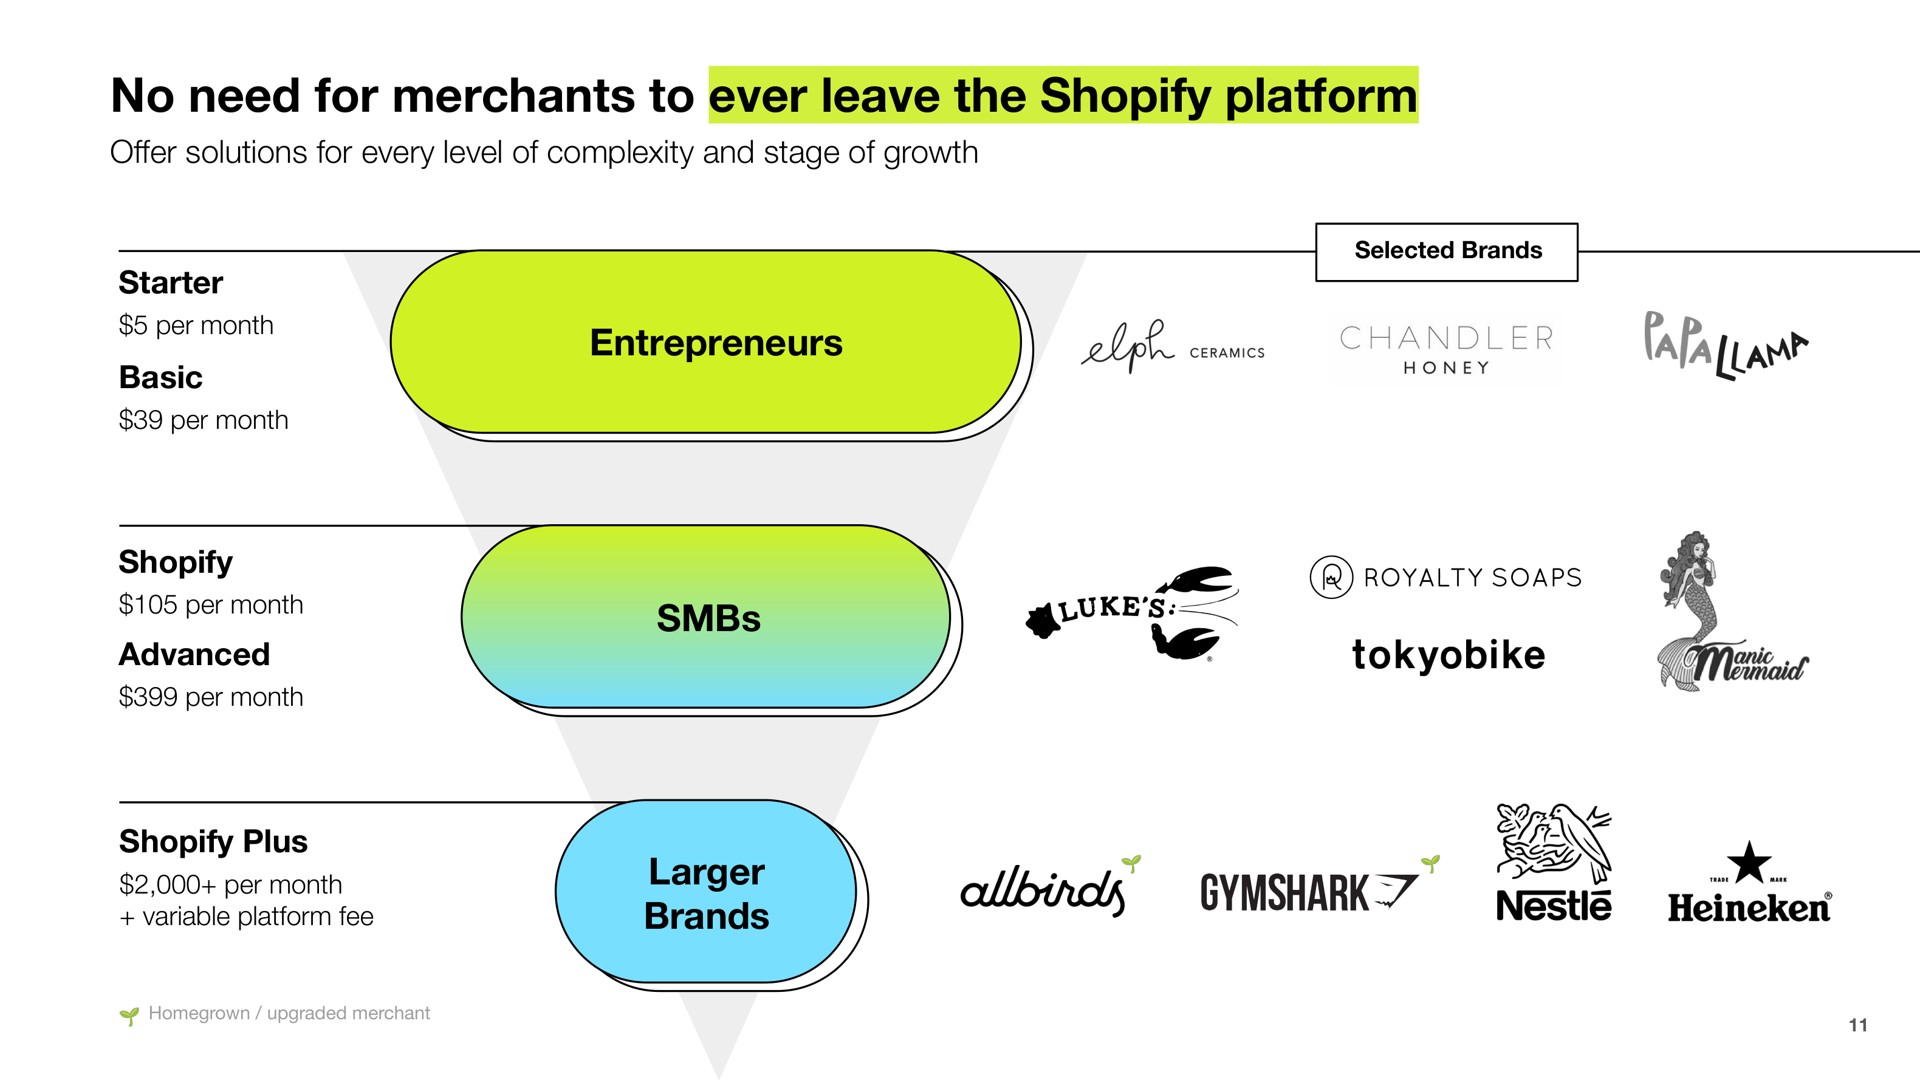 no need for merchants to ever leave the platform per chandler nestle | Shopify